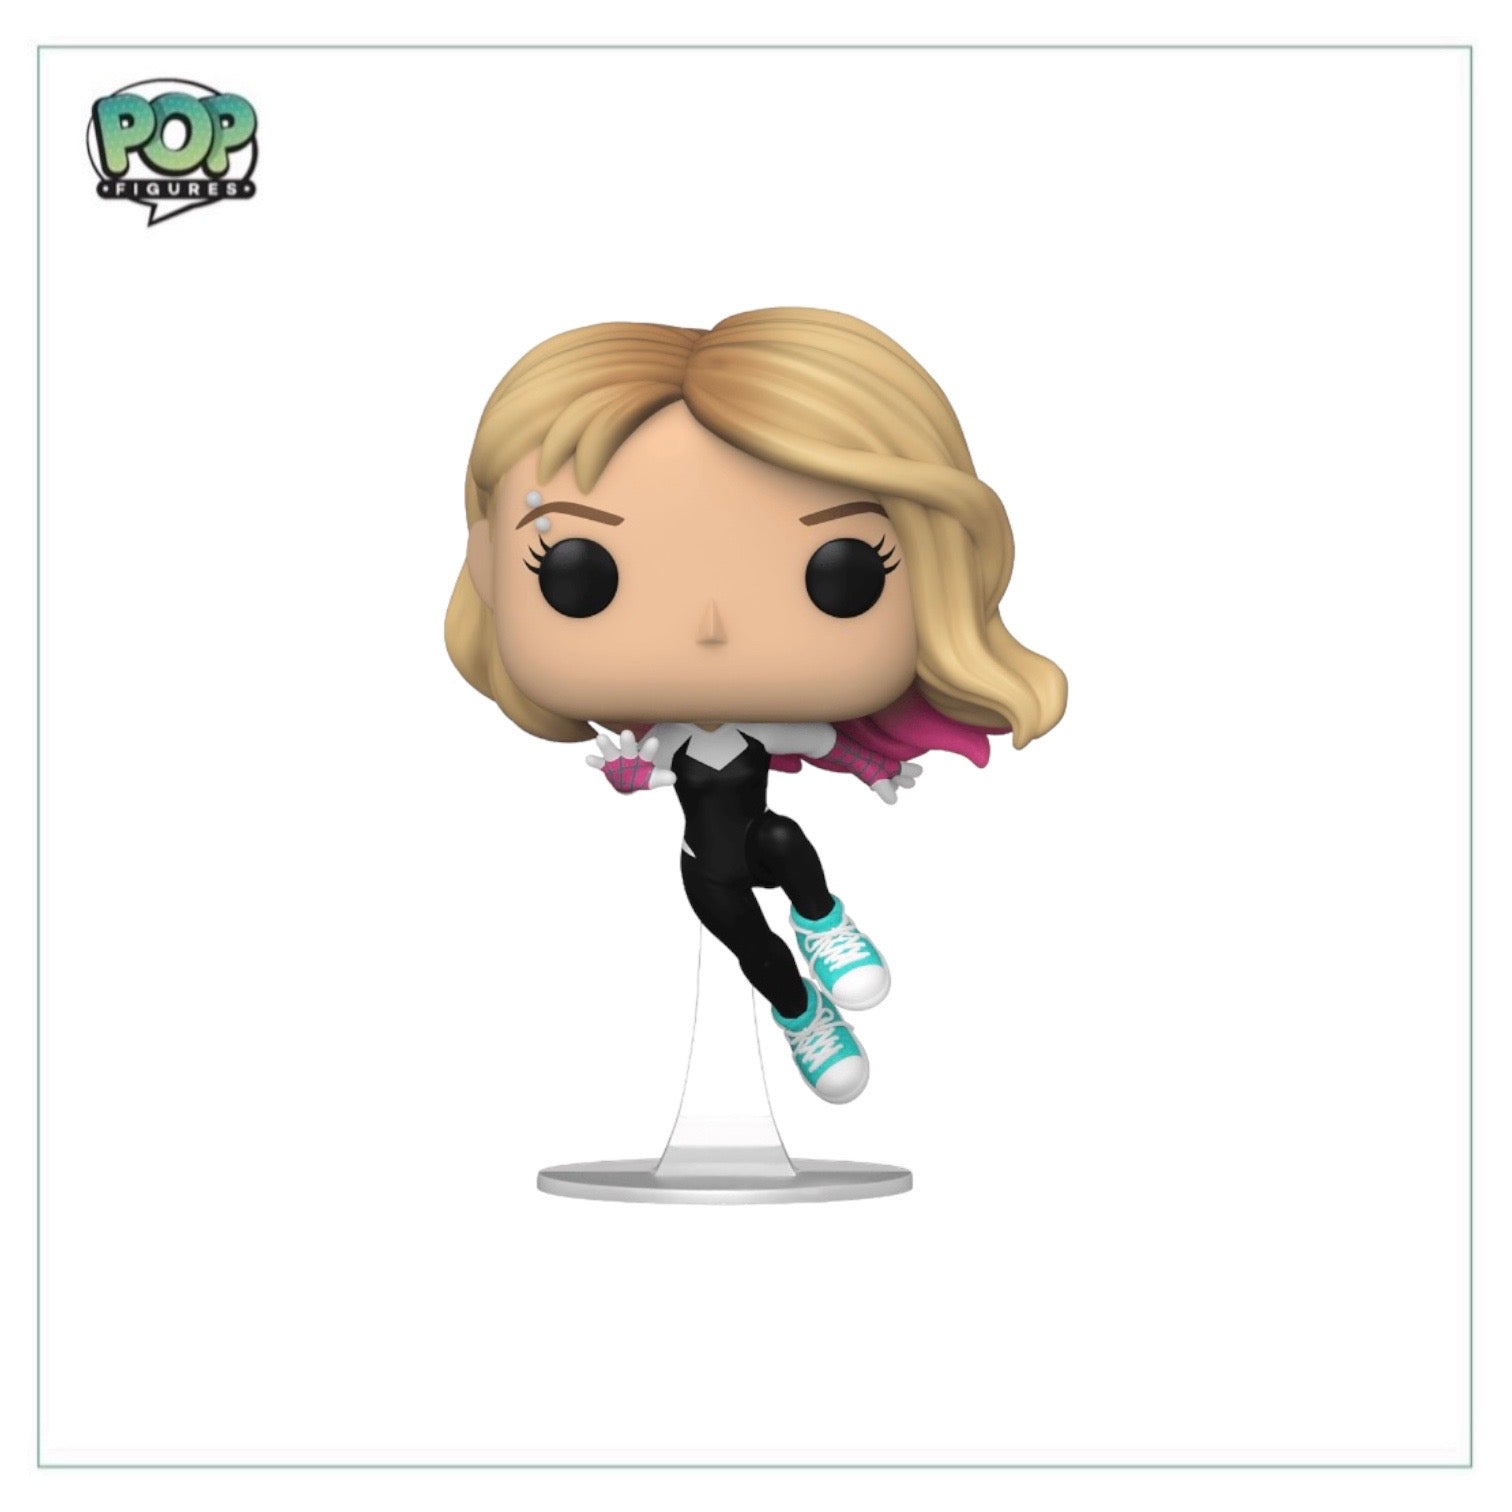 Spider-Gwen #1091 (Unmasked) Funko Pop! - Spider-Man Across the Spiderverse - Marvel Collector Corps Exclusive